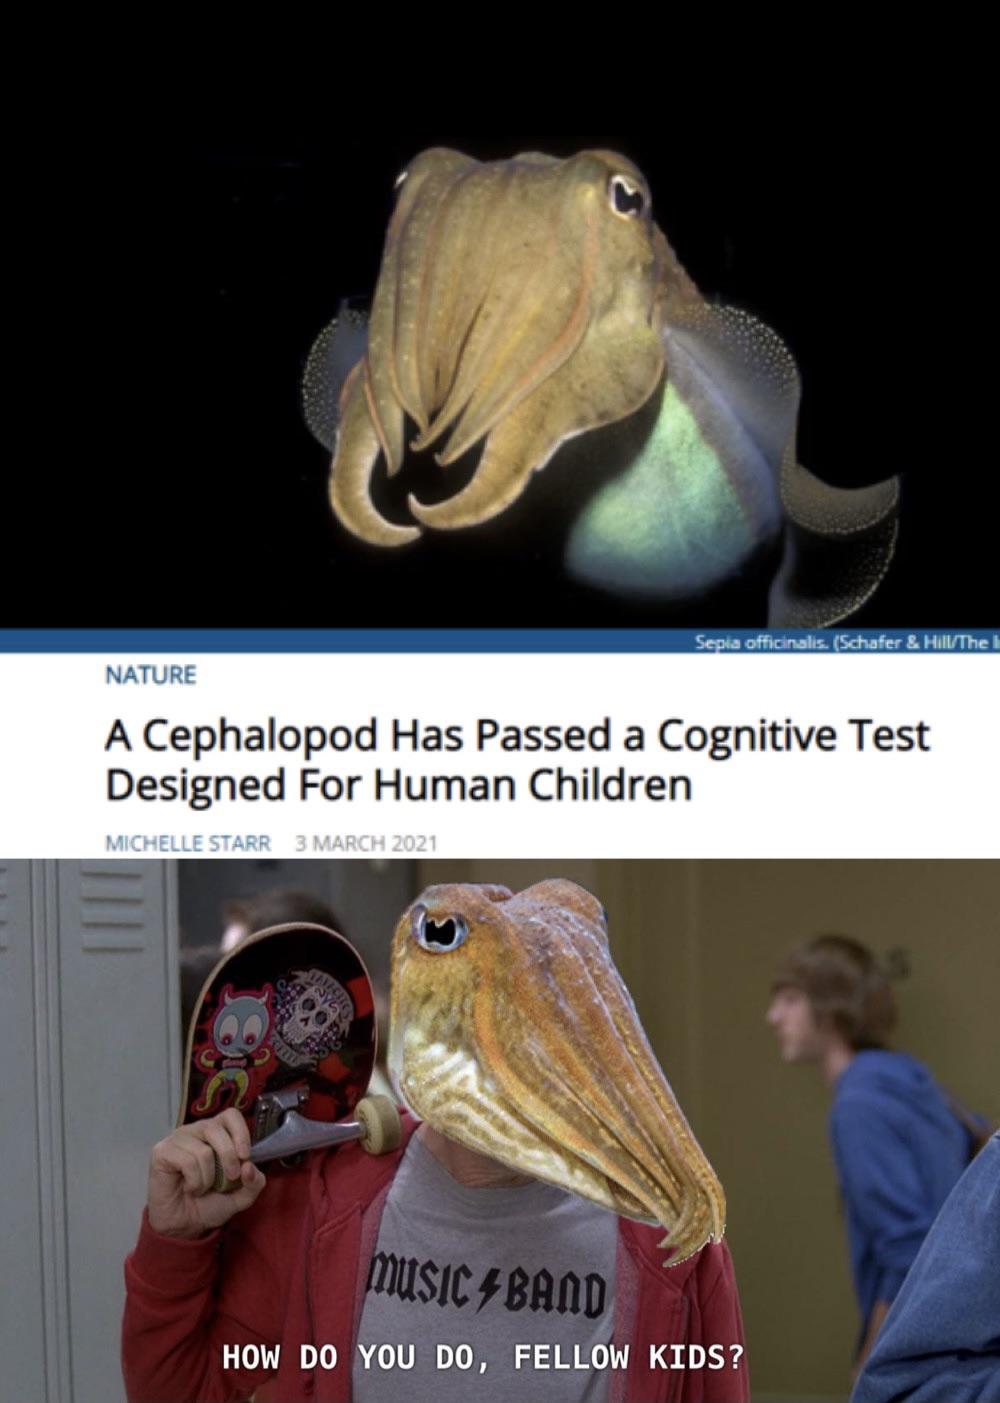 south africa meme - Sepia officinalis. Schafer & HillThe Nature A Cephalopod Has Passed a Cognitive Test Designed For Human Children Michelle Starr Music 4 Band How Do You Do, Fellow Kids?